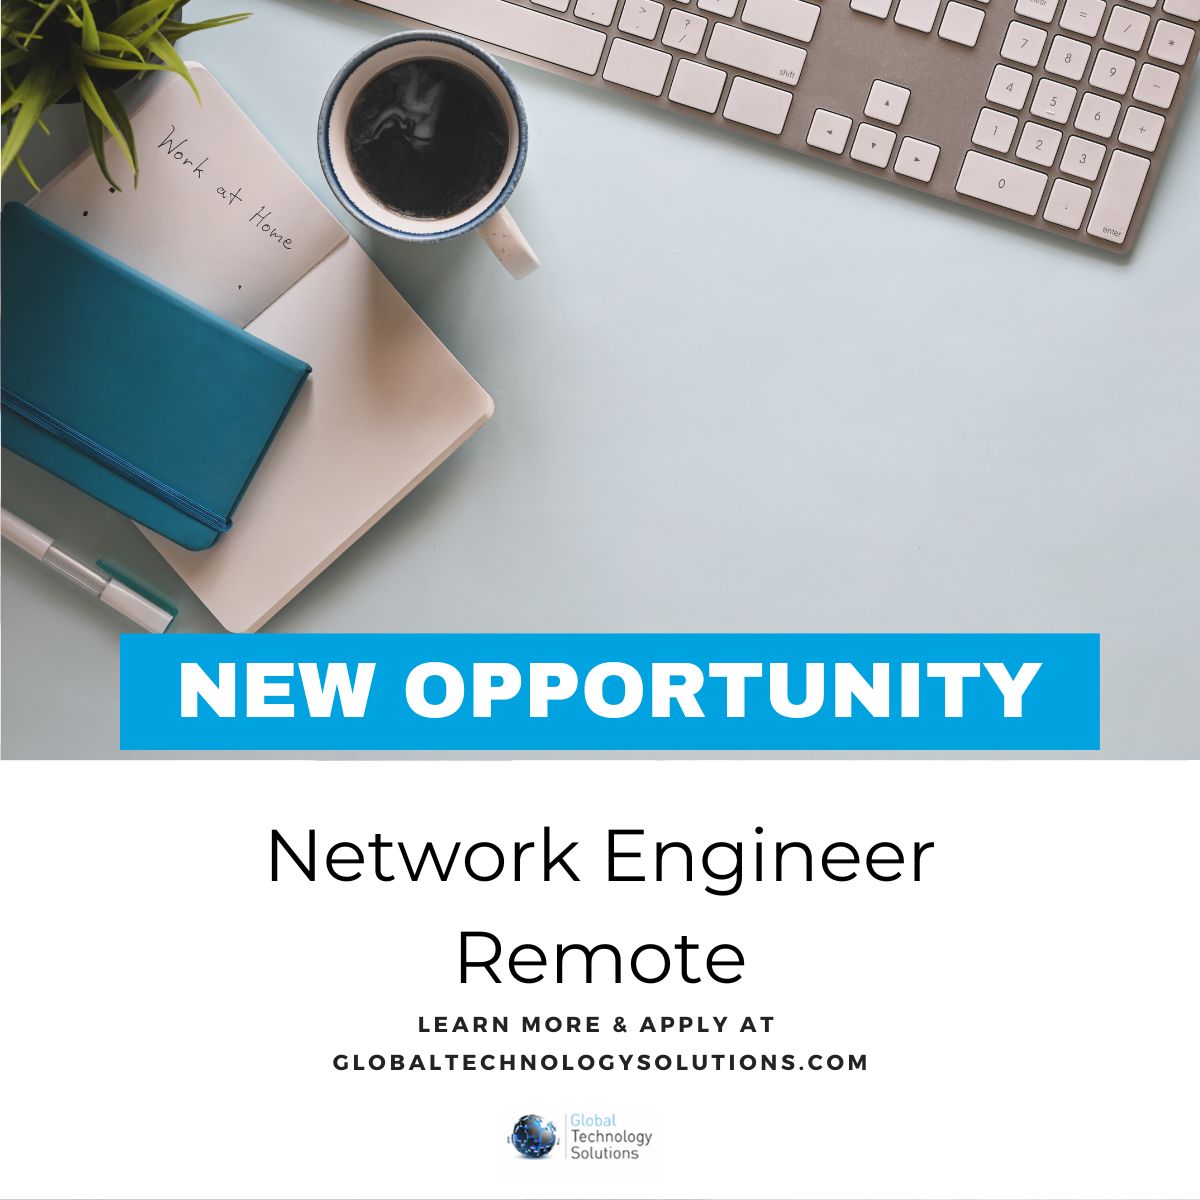 network engineer remote jobs from GTS.